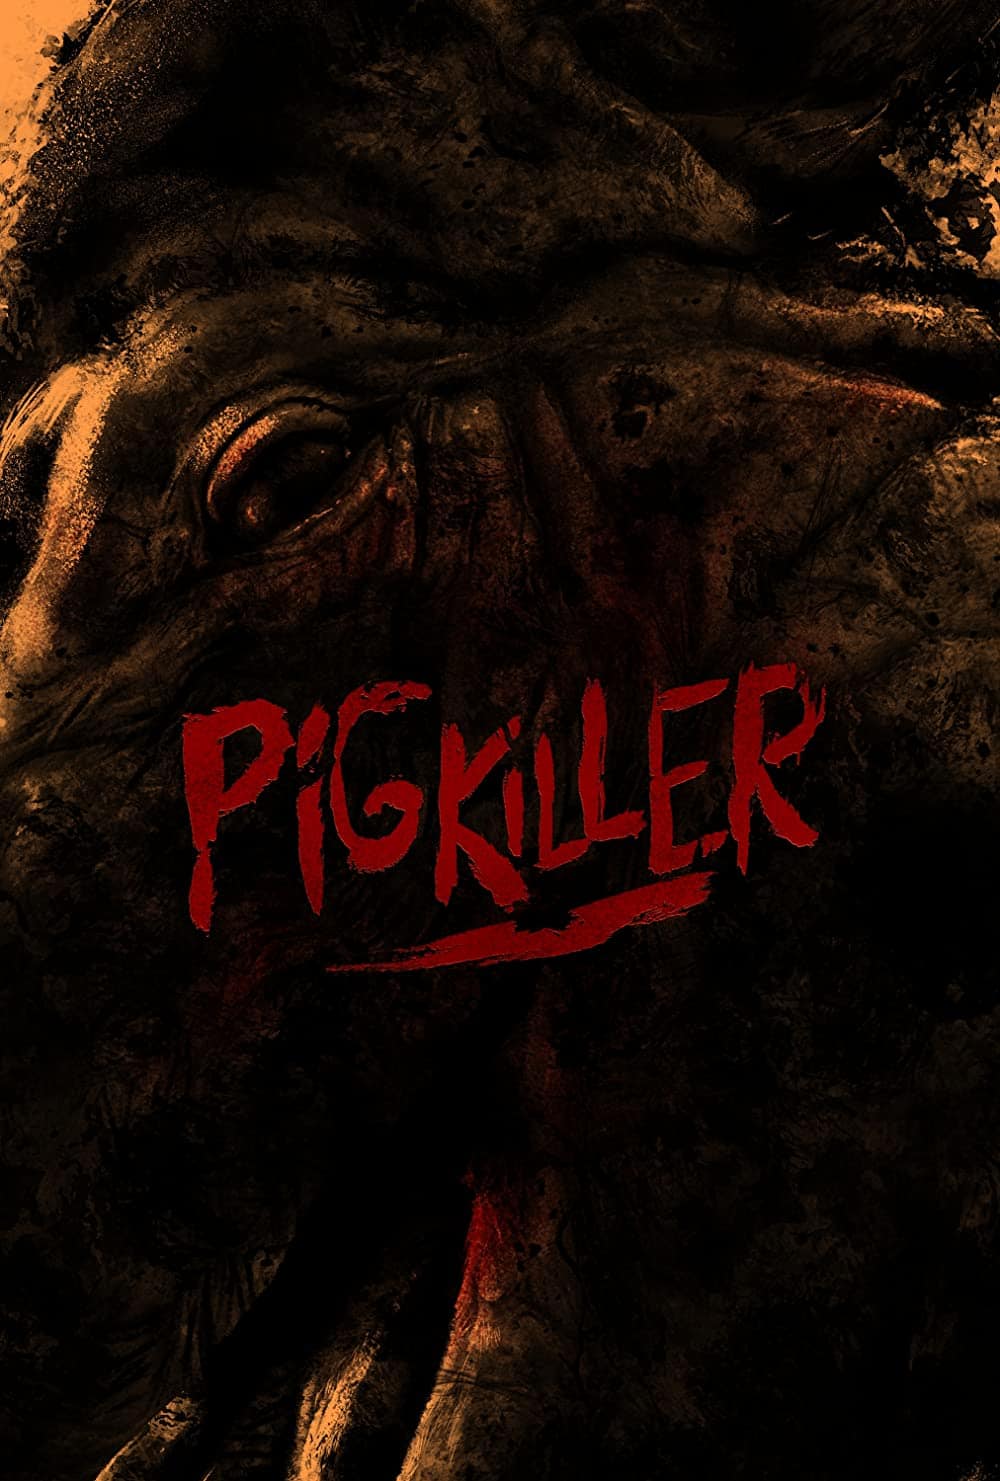 Mike’s Review: Pig Killer (2022 Another Hole in the Head Film Festival)